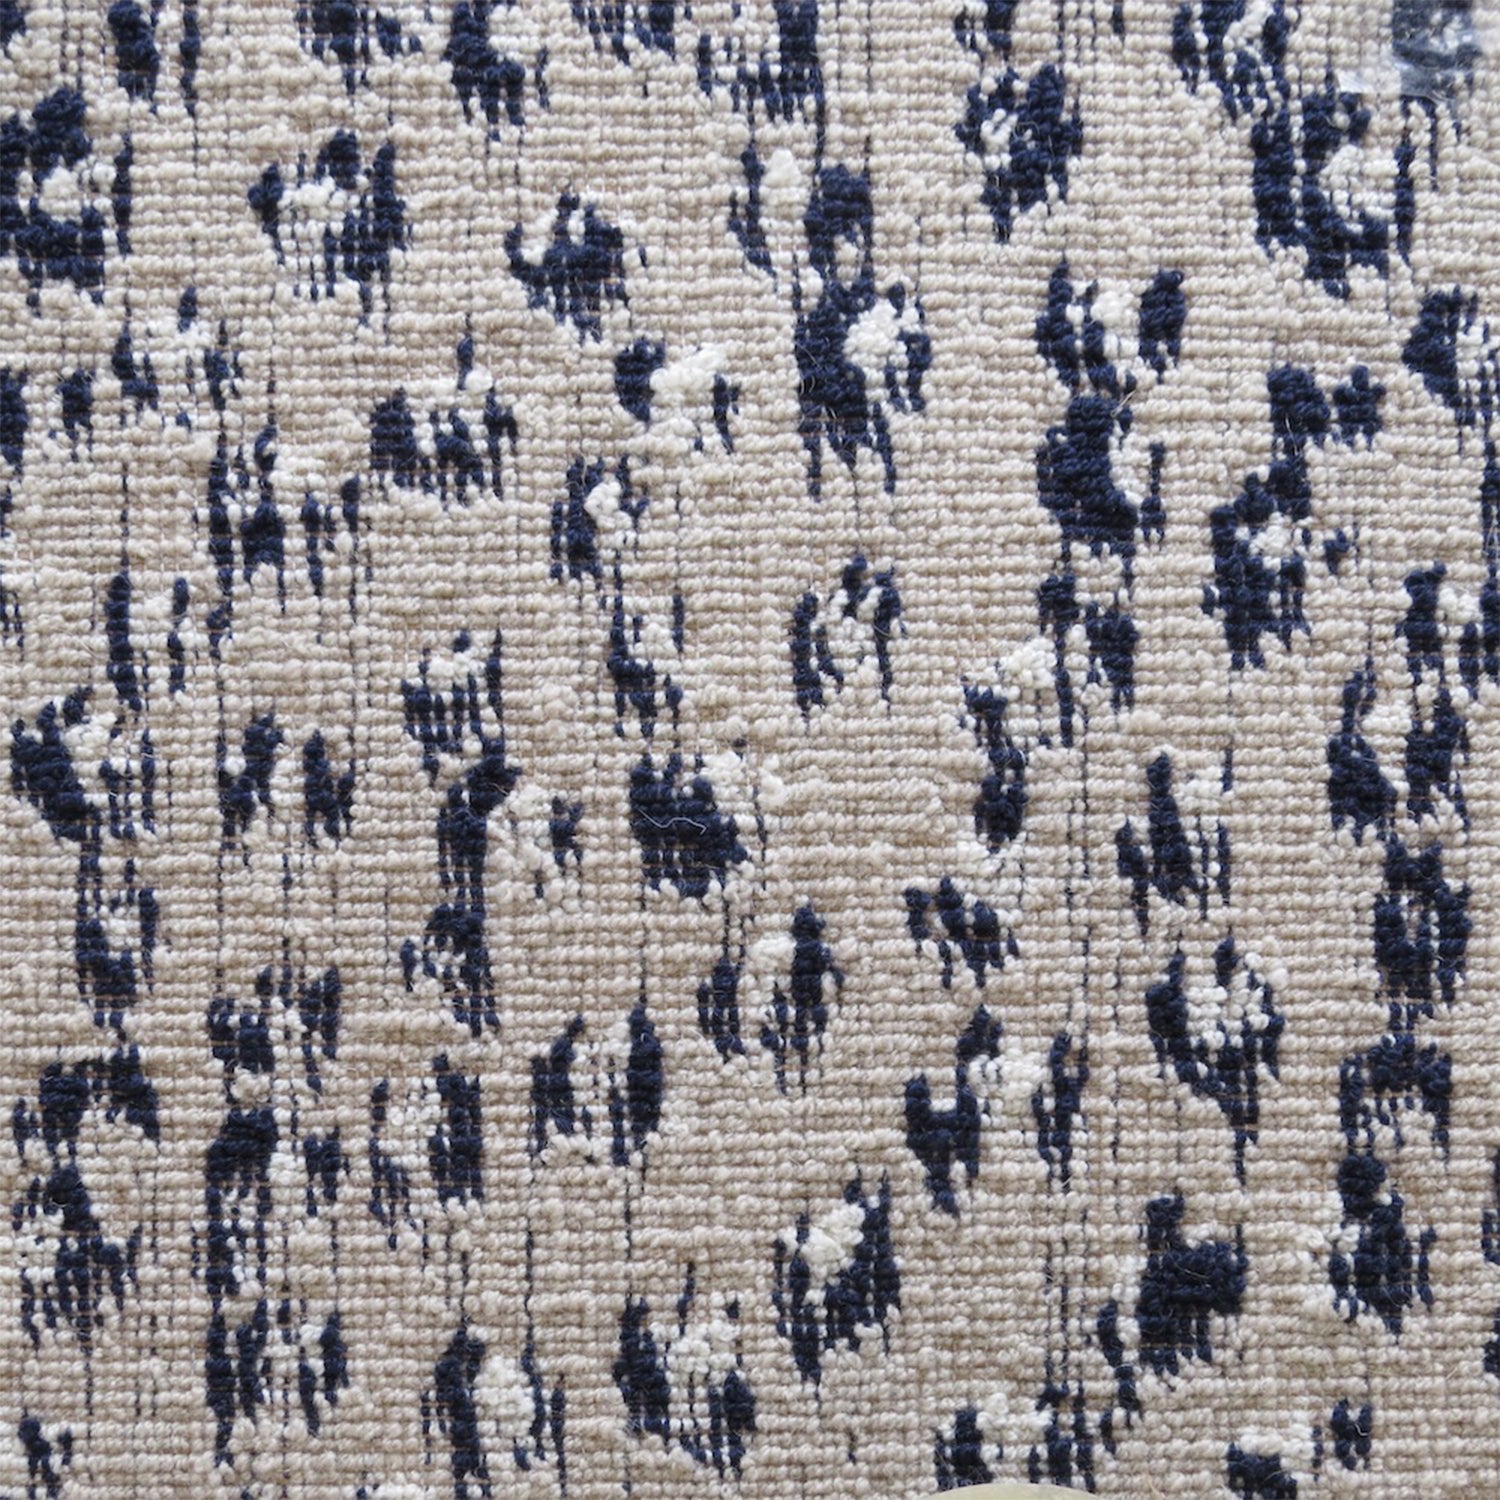 Wool broadloom carpet swatch in a painterly floral pattern in navy and cream on a tan field.